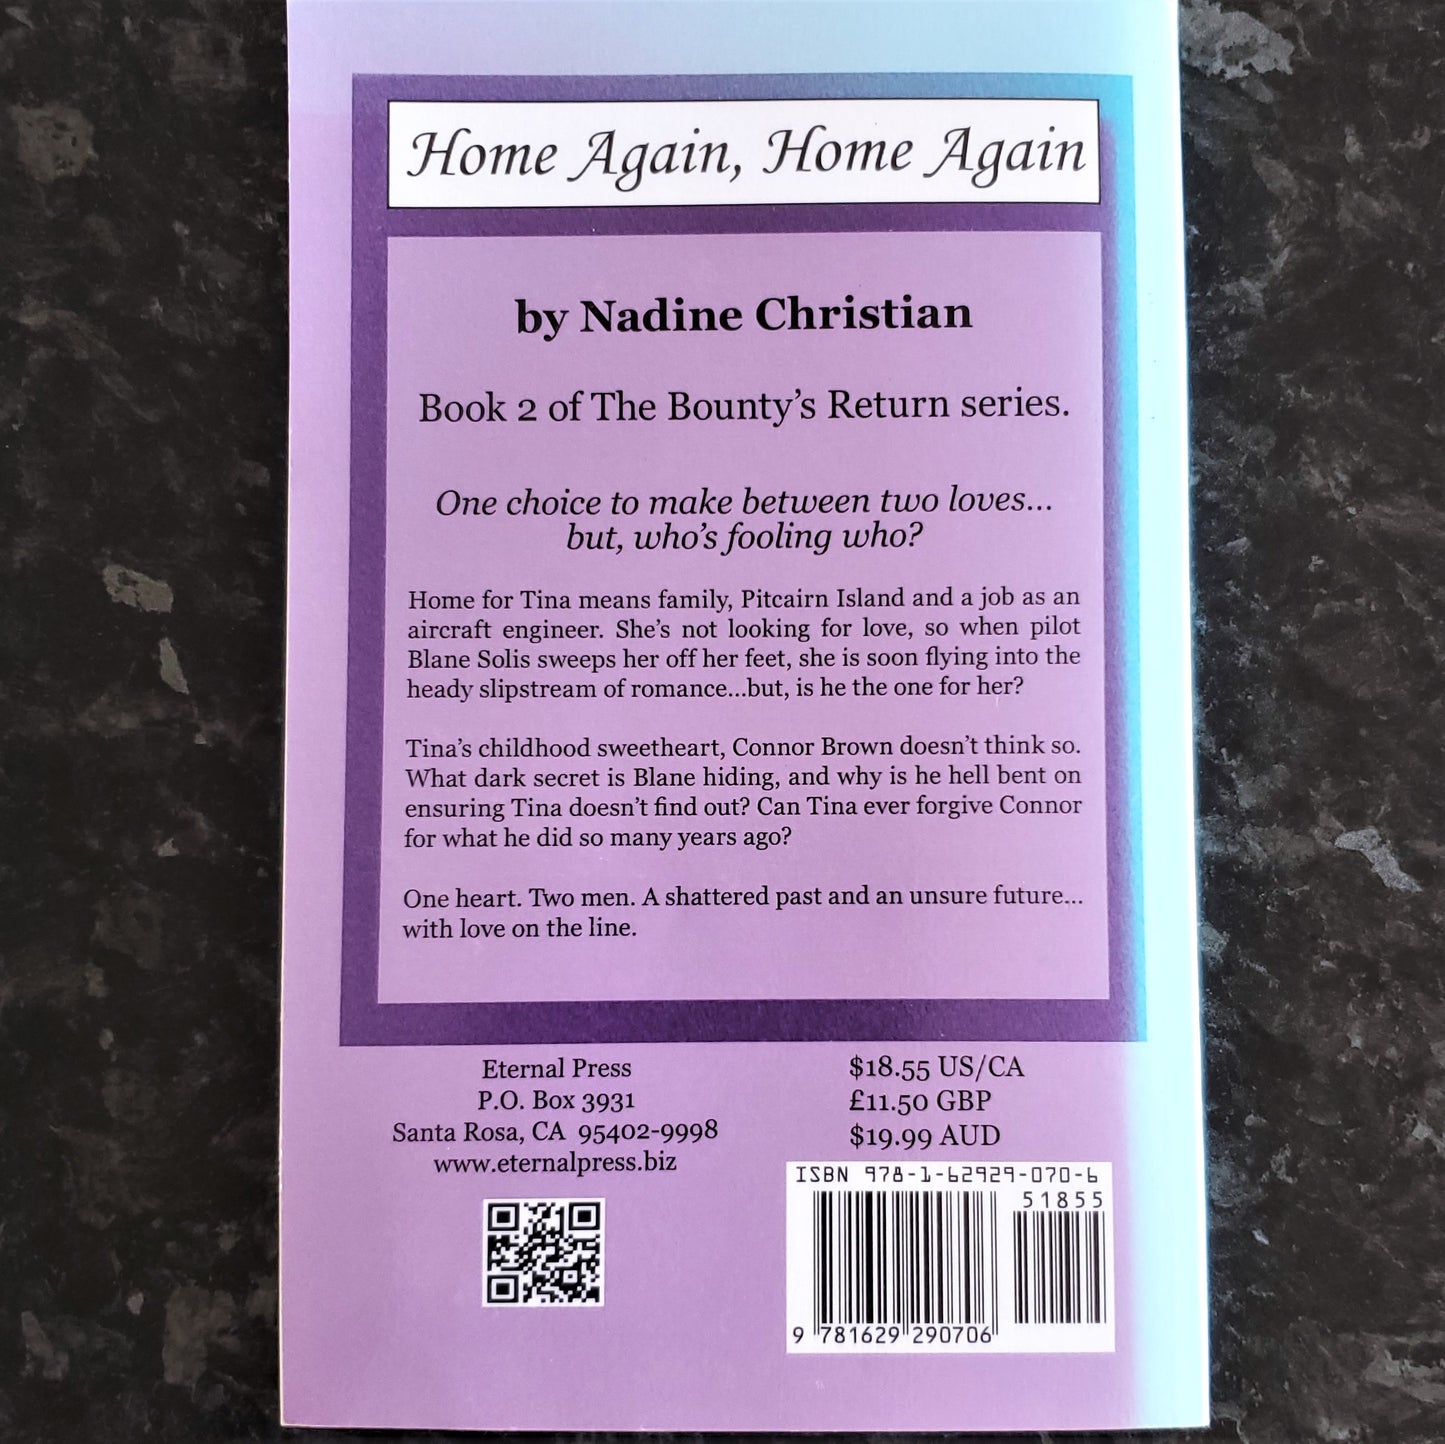 Home Again, Home Again - Book 2 of the Bounty's Retreat Series -  Signed by author Nadine Christian (now Faulkner)